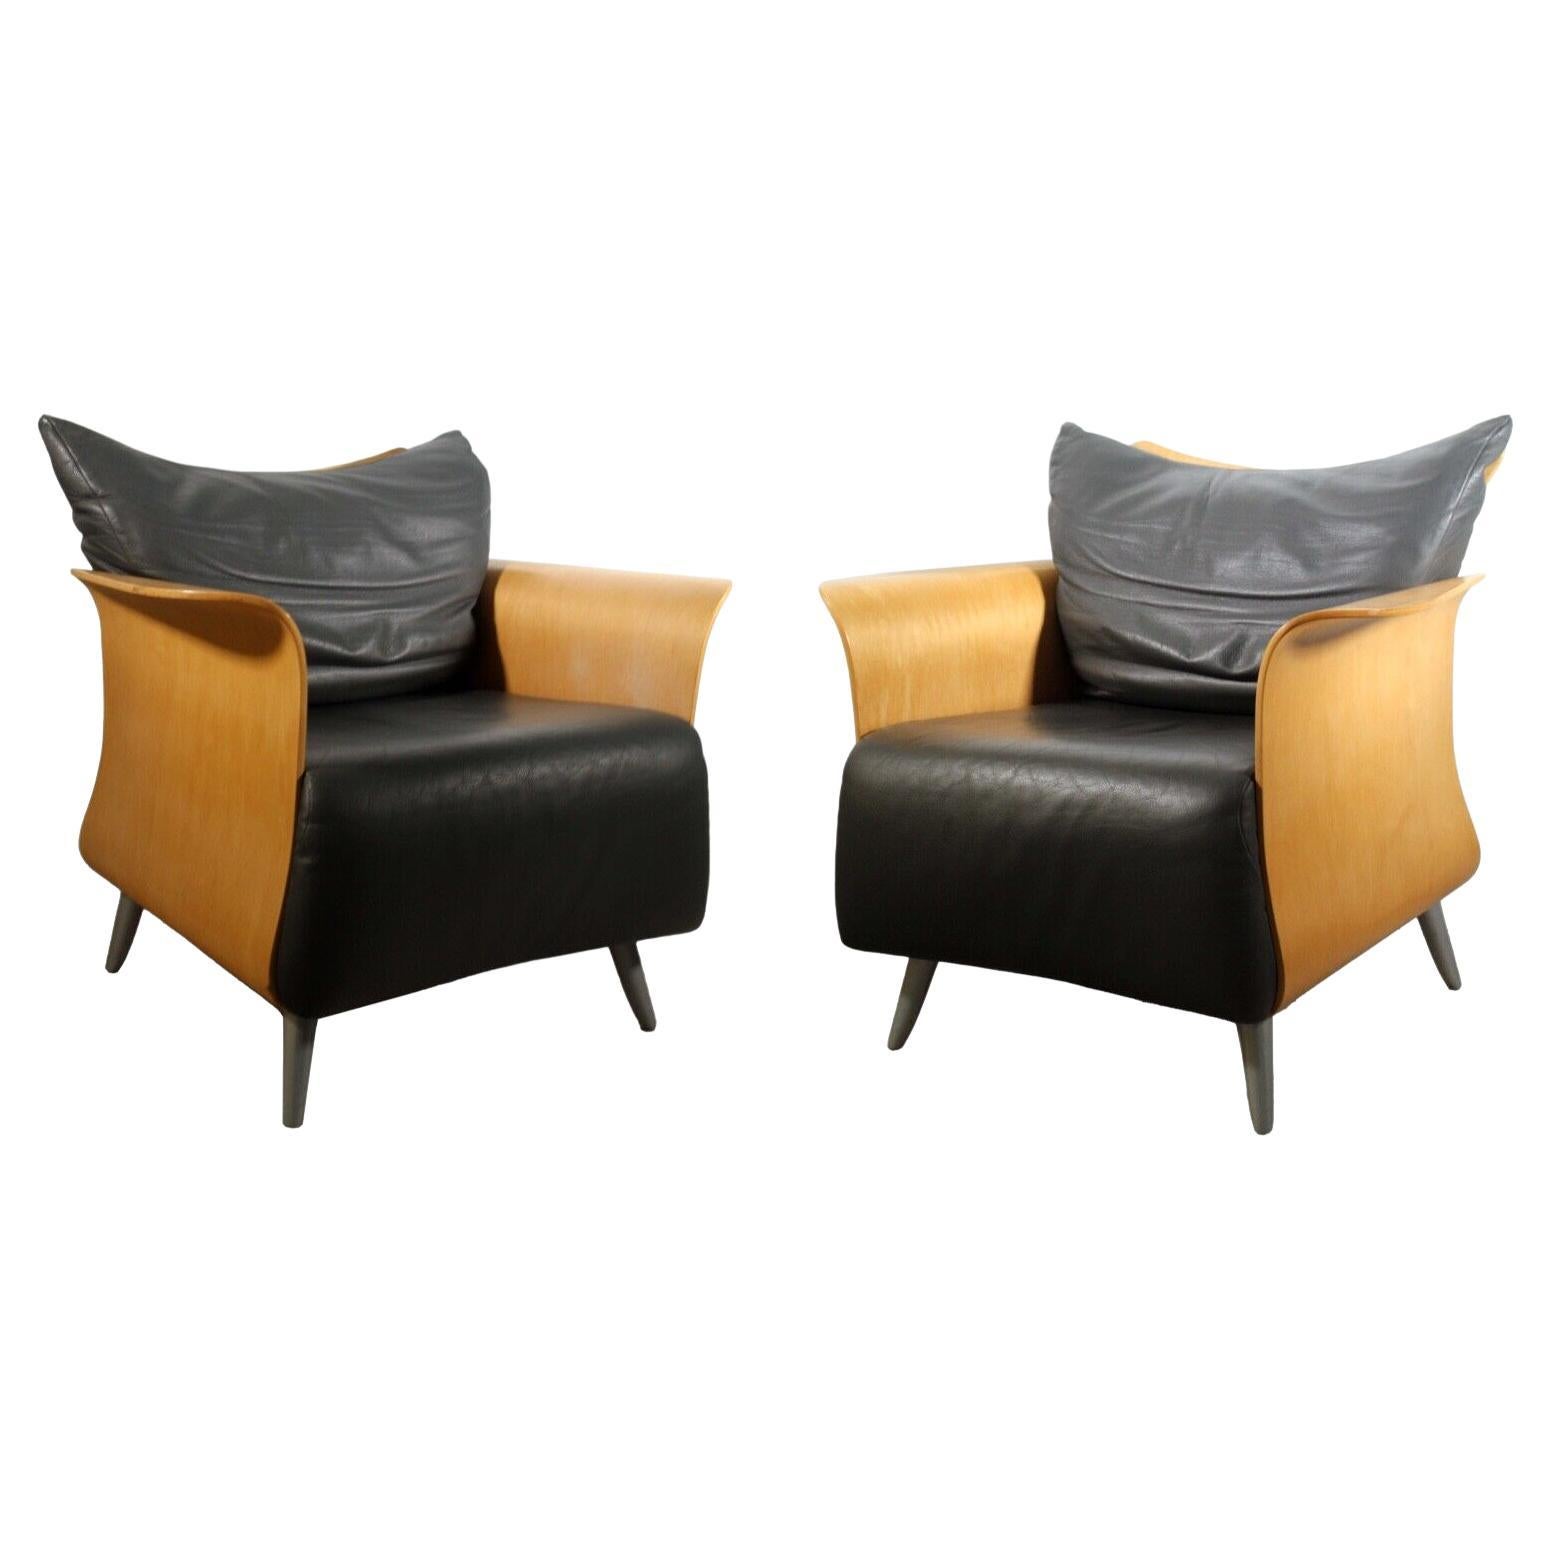 Contemporary Modern Pair of Belle Bentwood Leather Lounge Chairs by Keilhauer